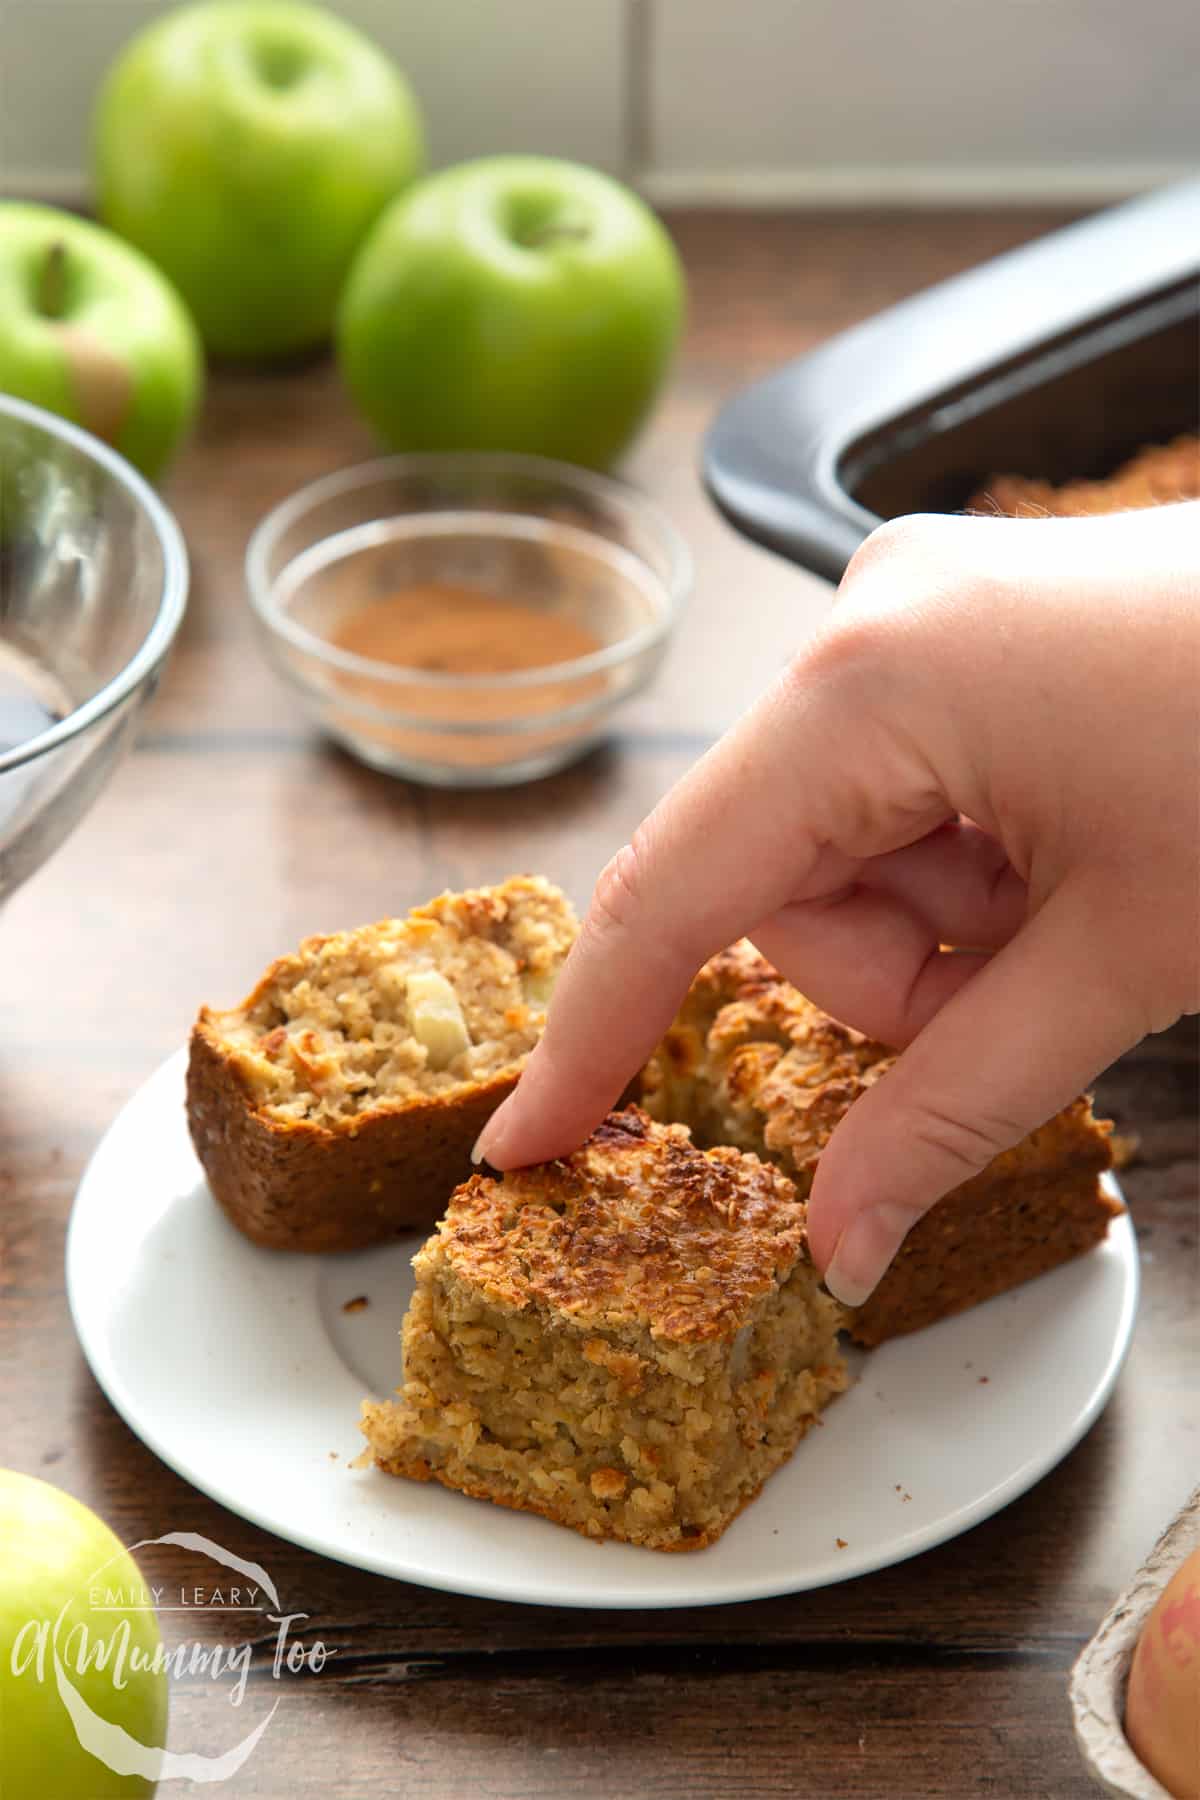 Freshly baked porridge squares cut into 16 pieces. A hand reaches to take a piece.